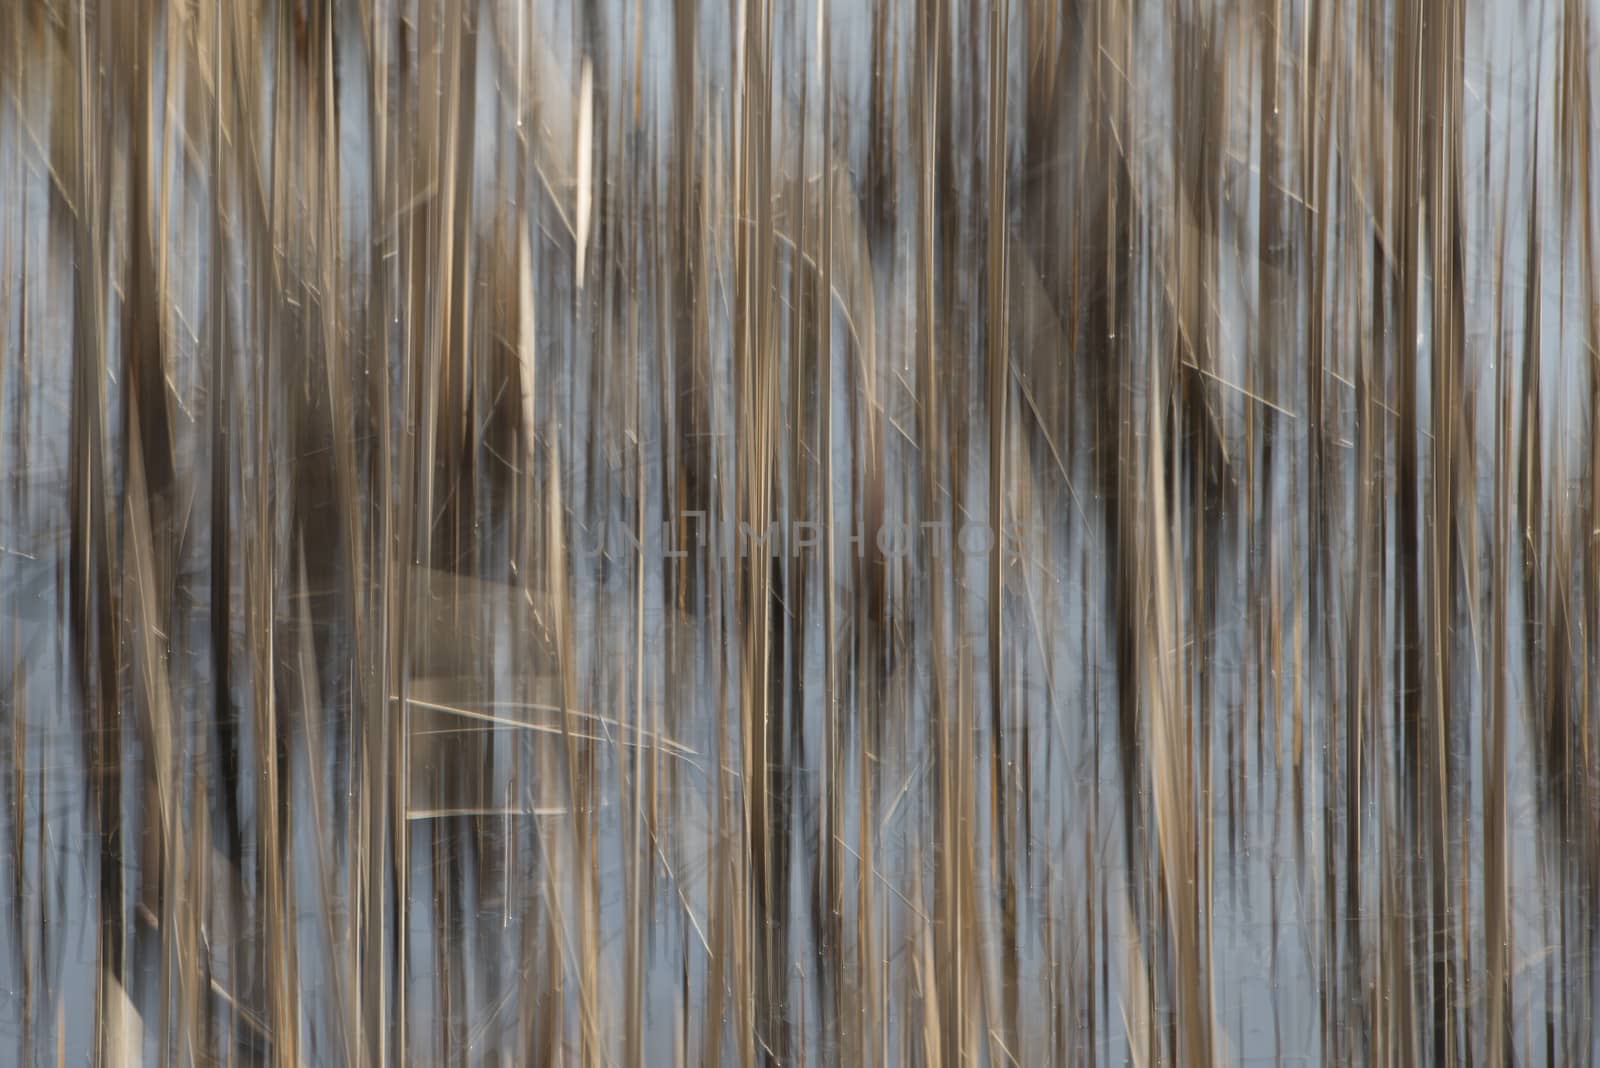 Abstract cane stems by Tofotografie